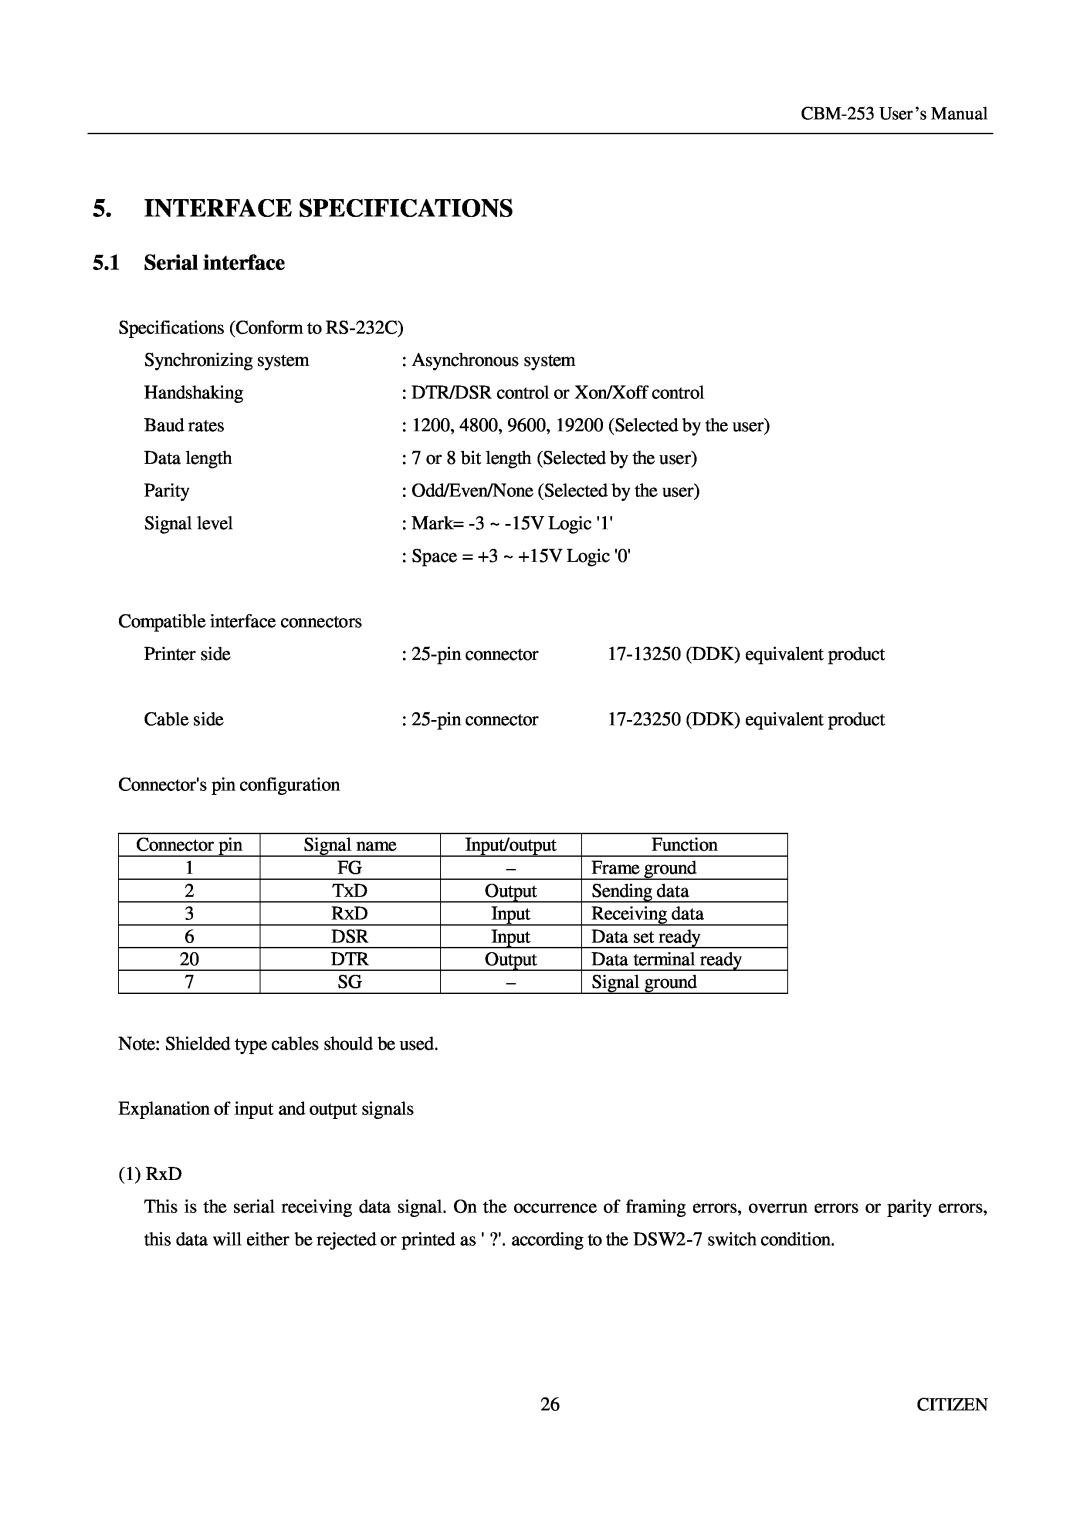 Citizen Systems CBM-253 manual Interface Specifications, Serial interface 